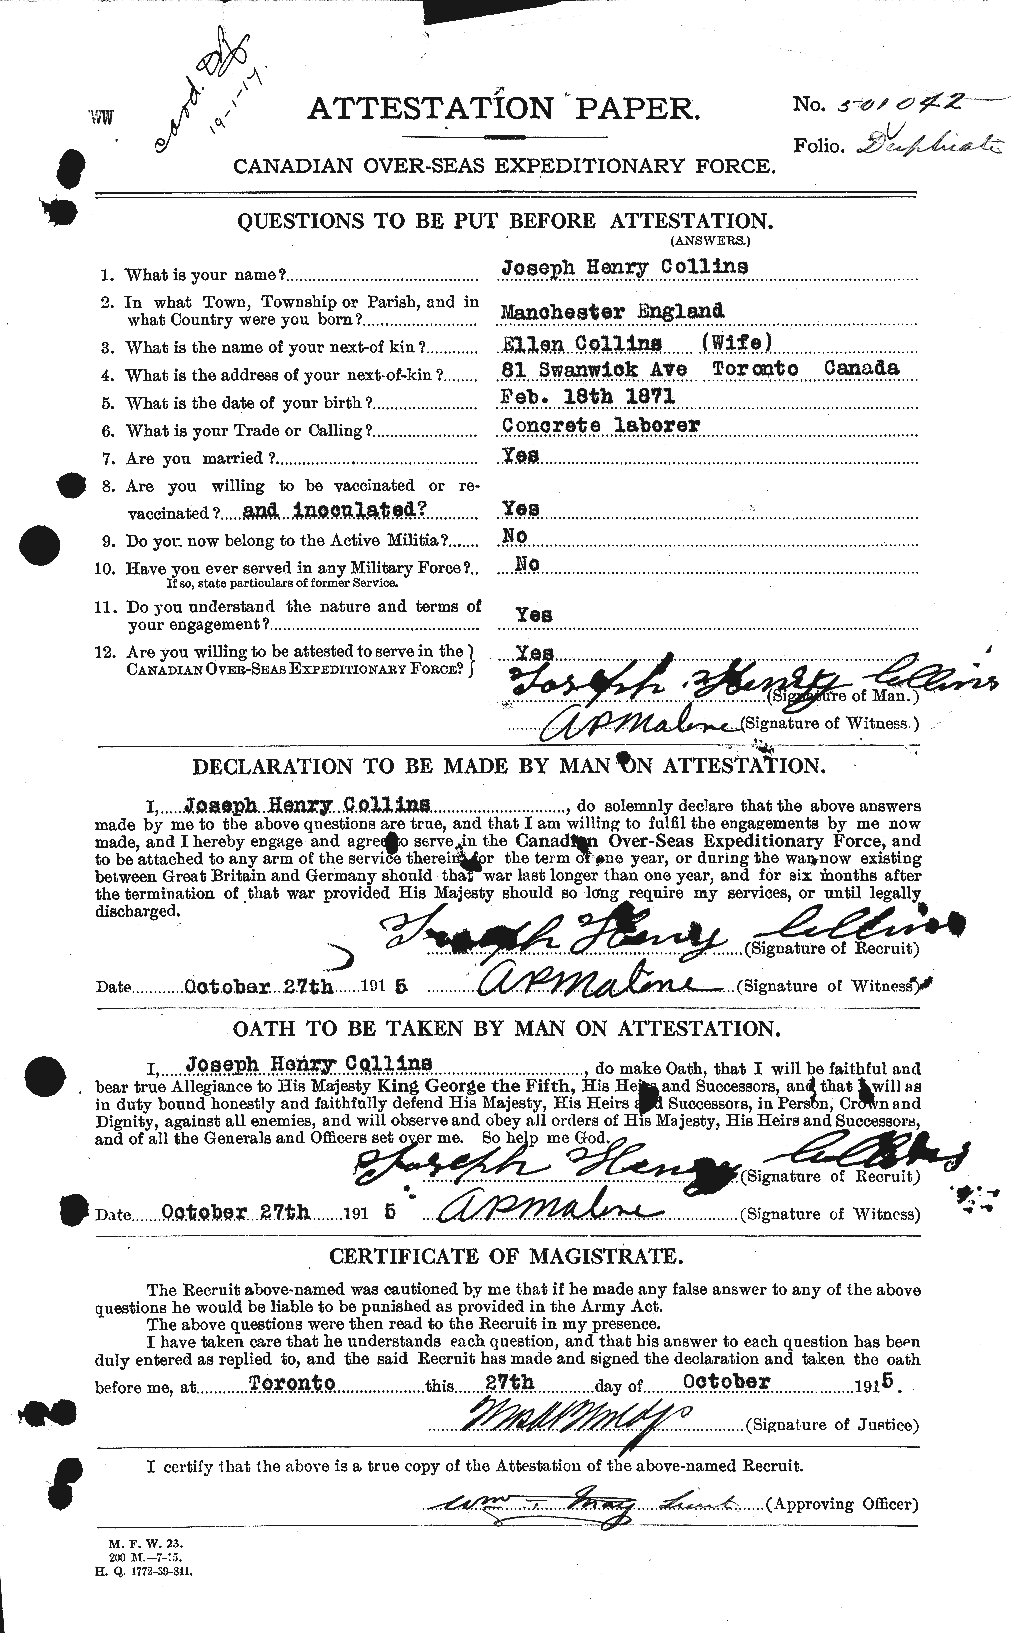 Personnel Records of the First World War - CEF 069511a